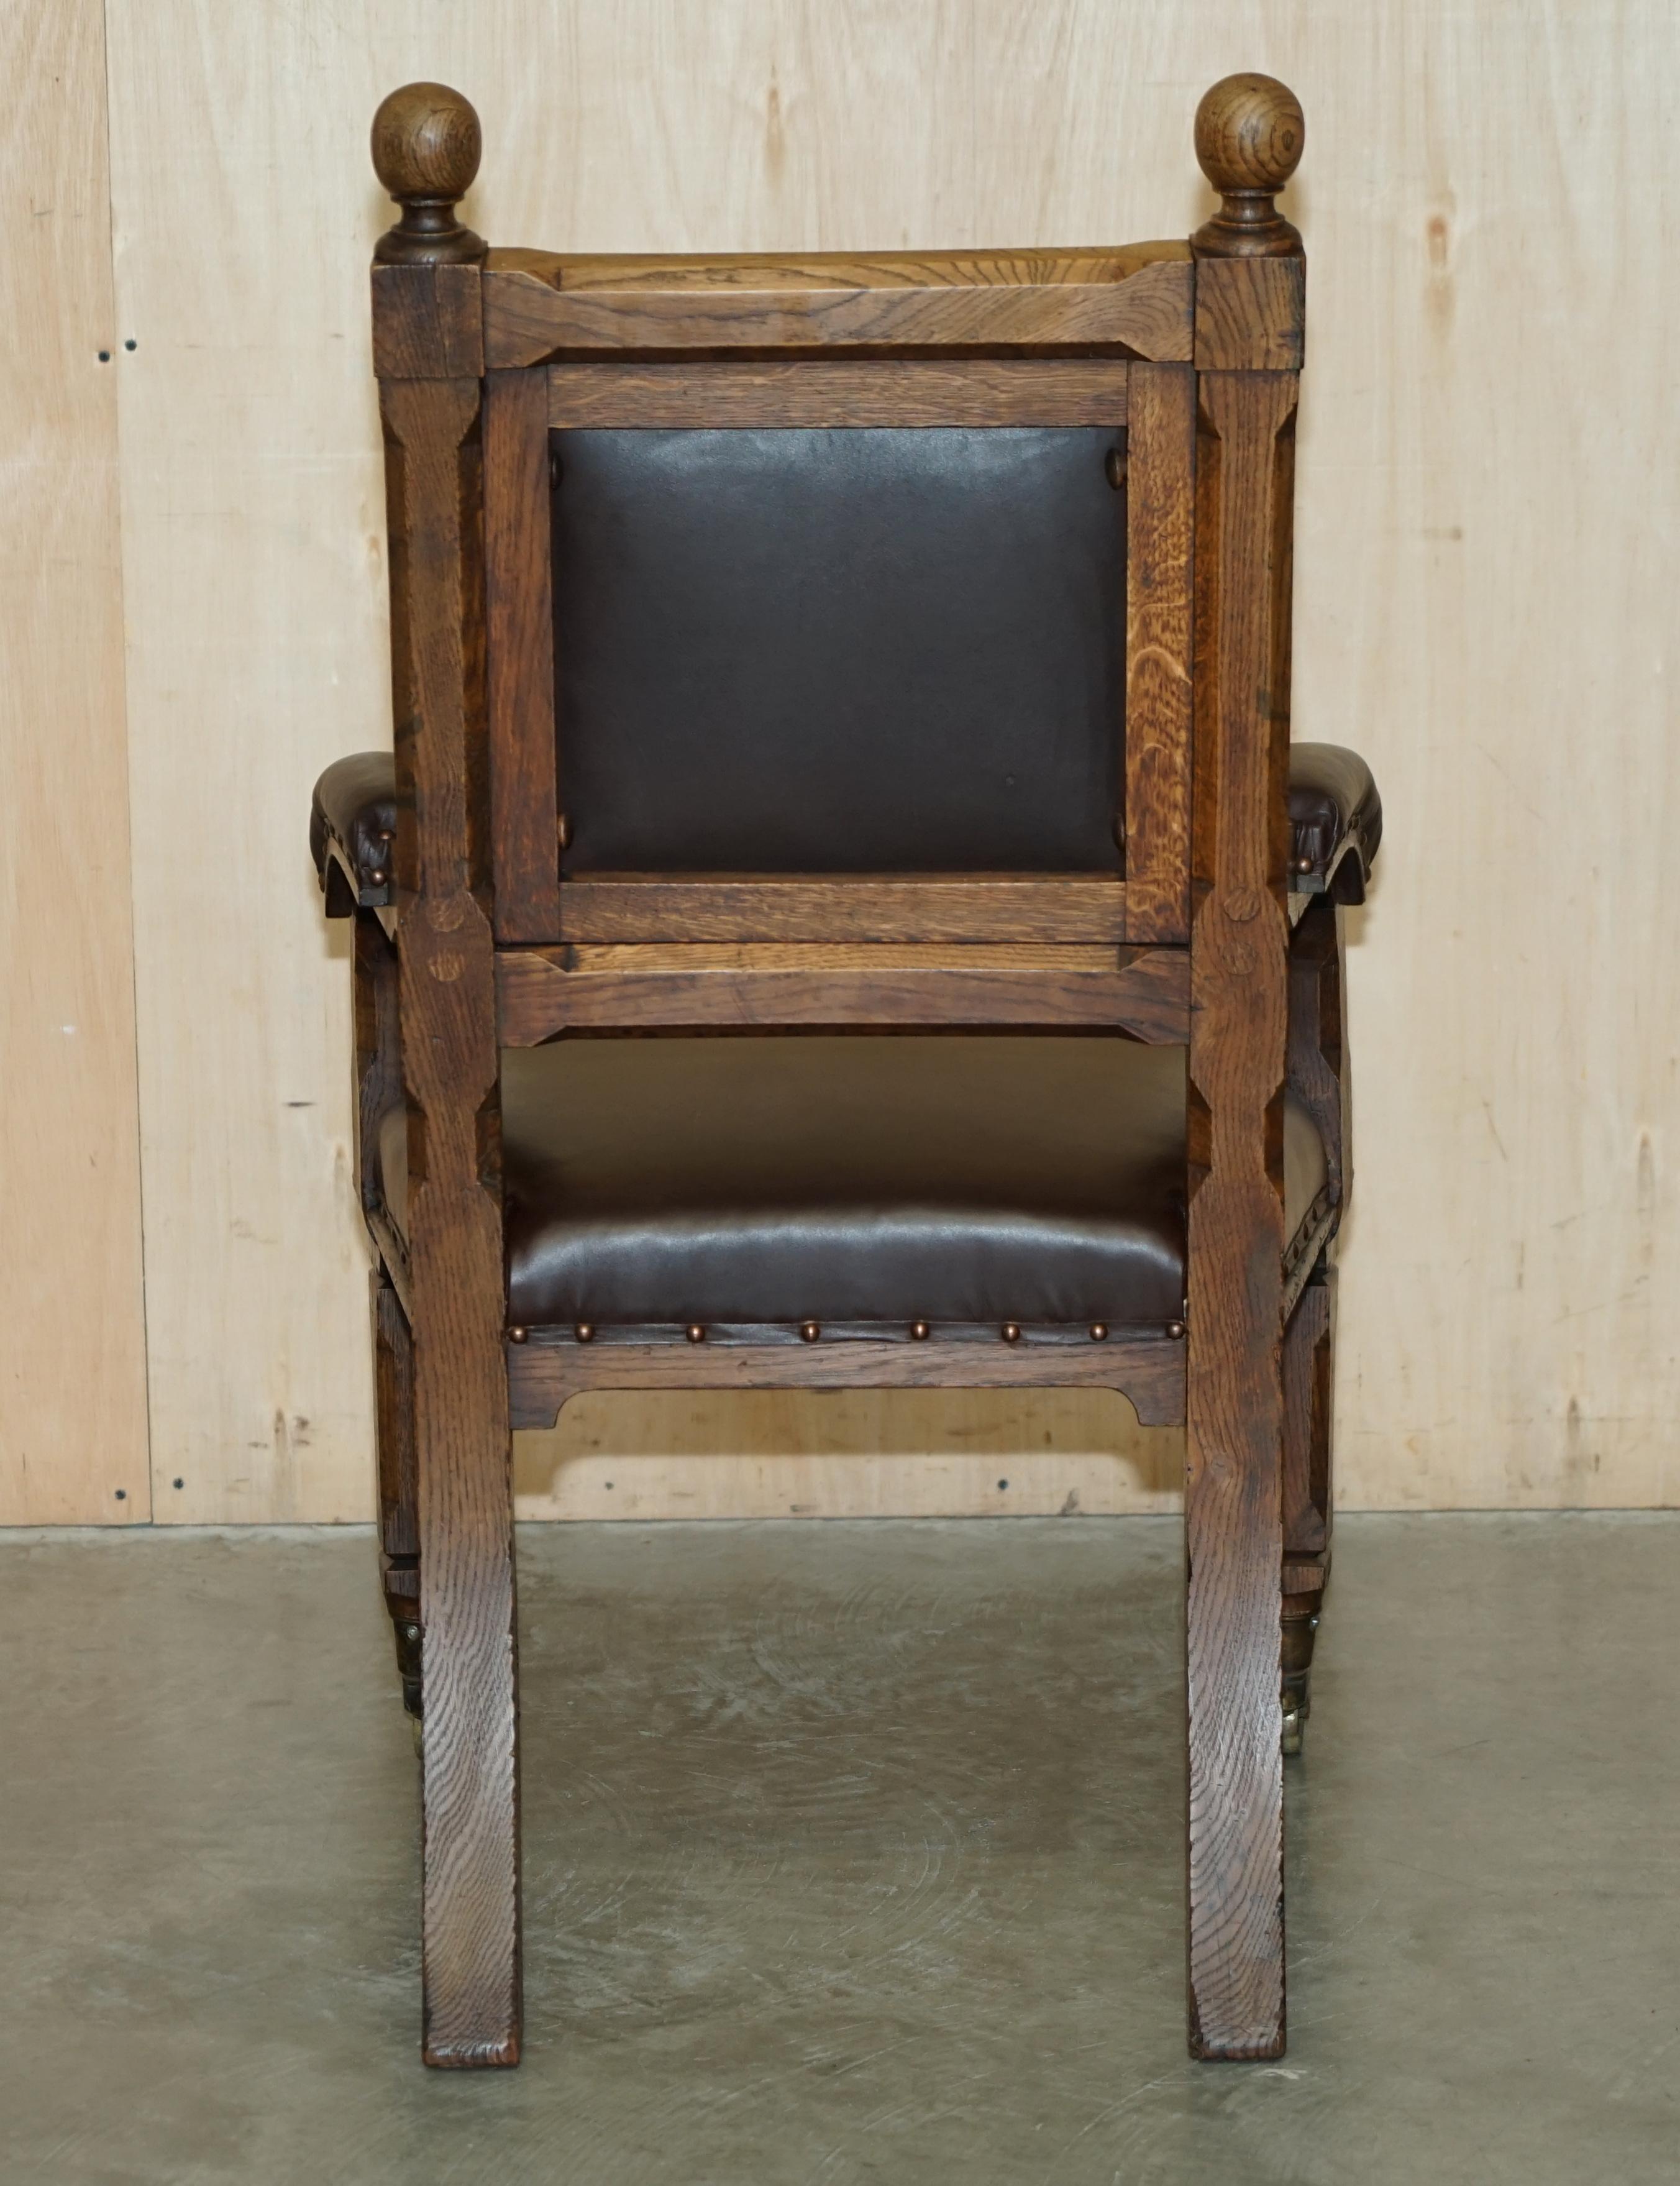 STUNNING ANTIQUE CIRCA 1880 GOTHIC REViVAL OAK PUGIN STYLE CARVER ARMCHAIR For Sale 8